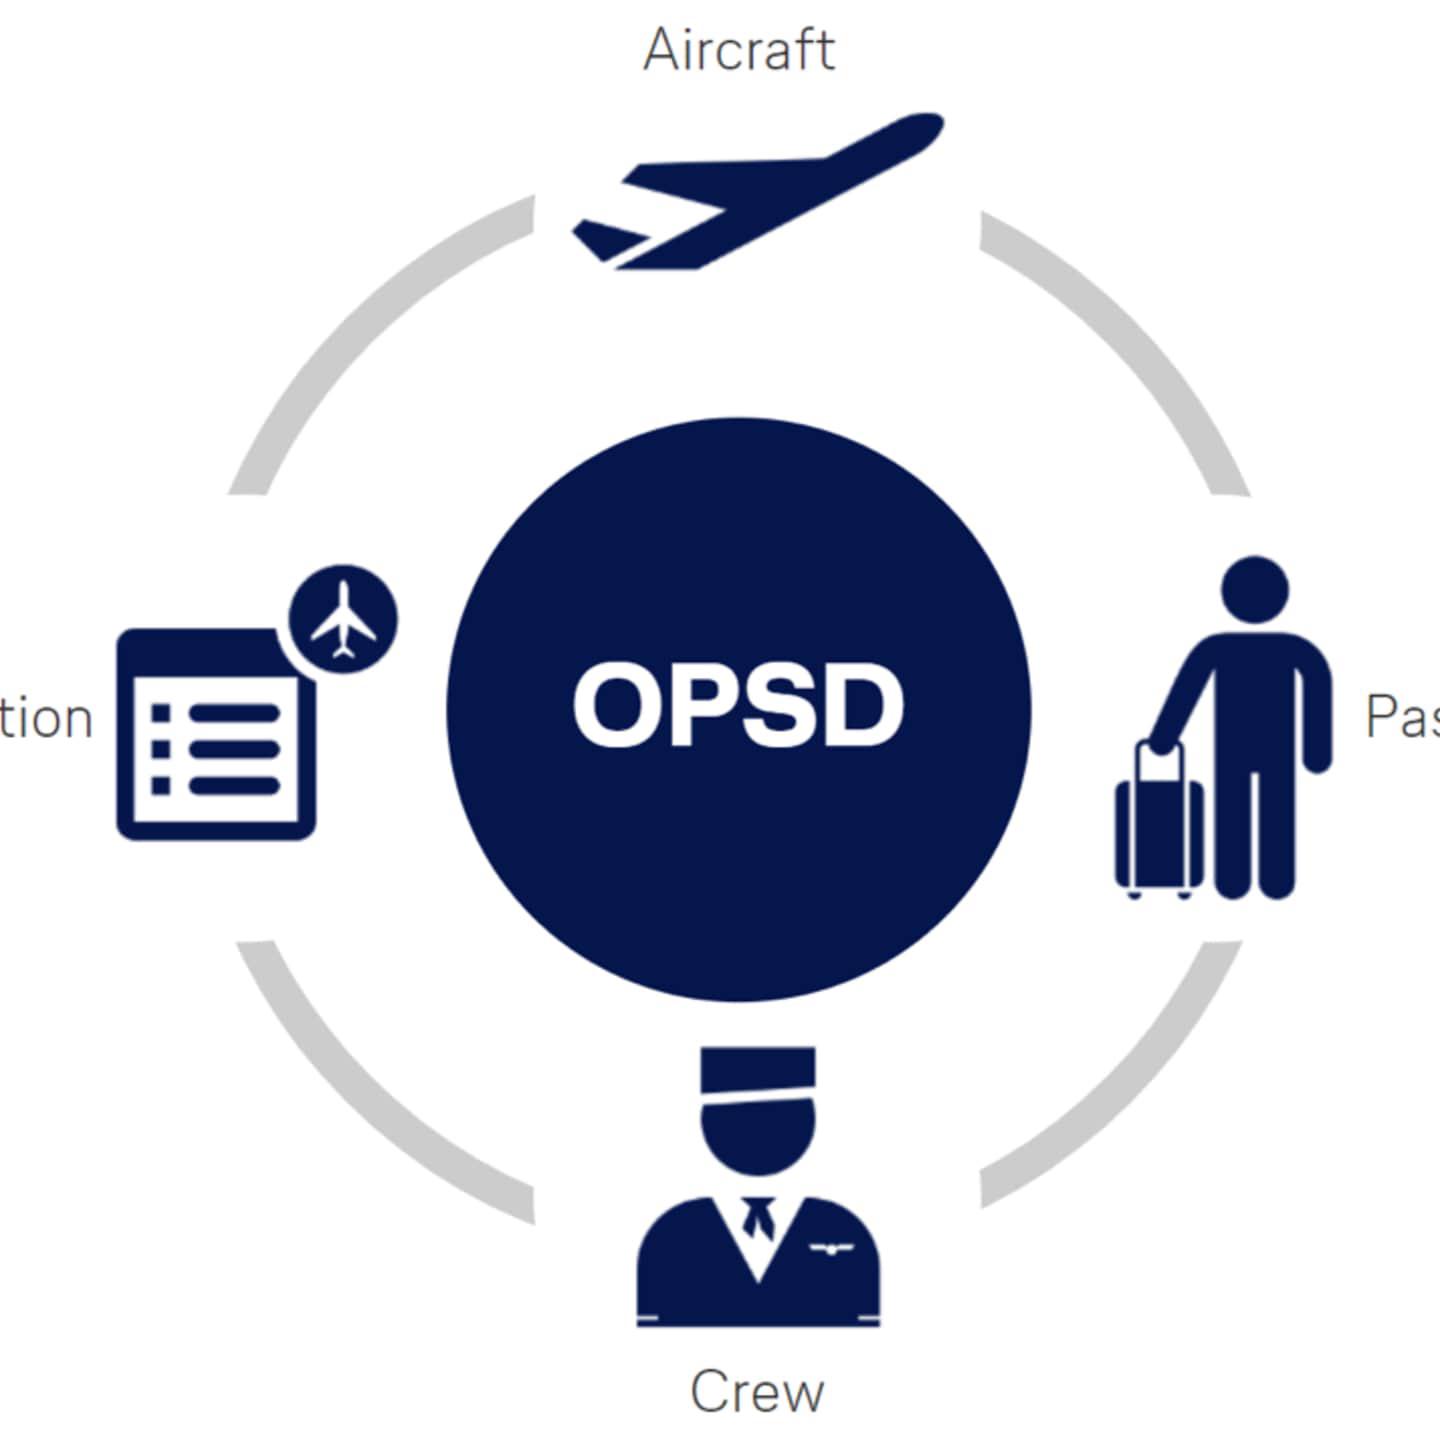 OPSD - Operations Decision Support Suite